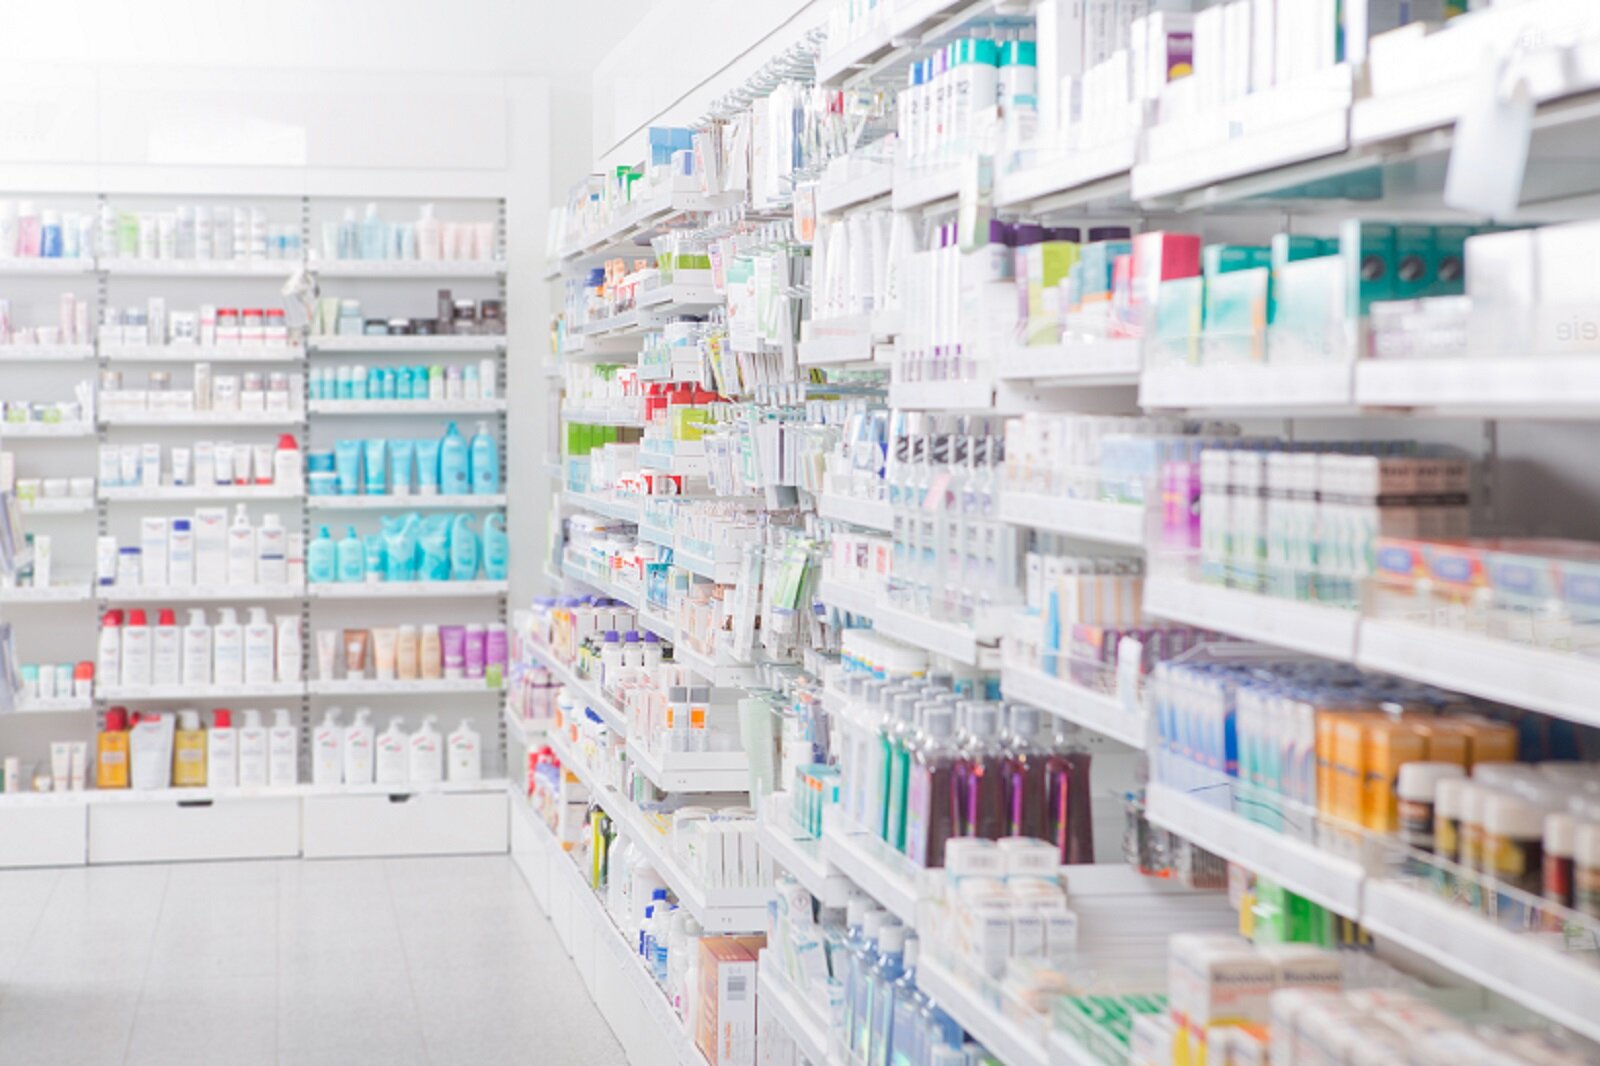 Running Pharmacy & Clinic For Sale-Rs.1,500,000